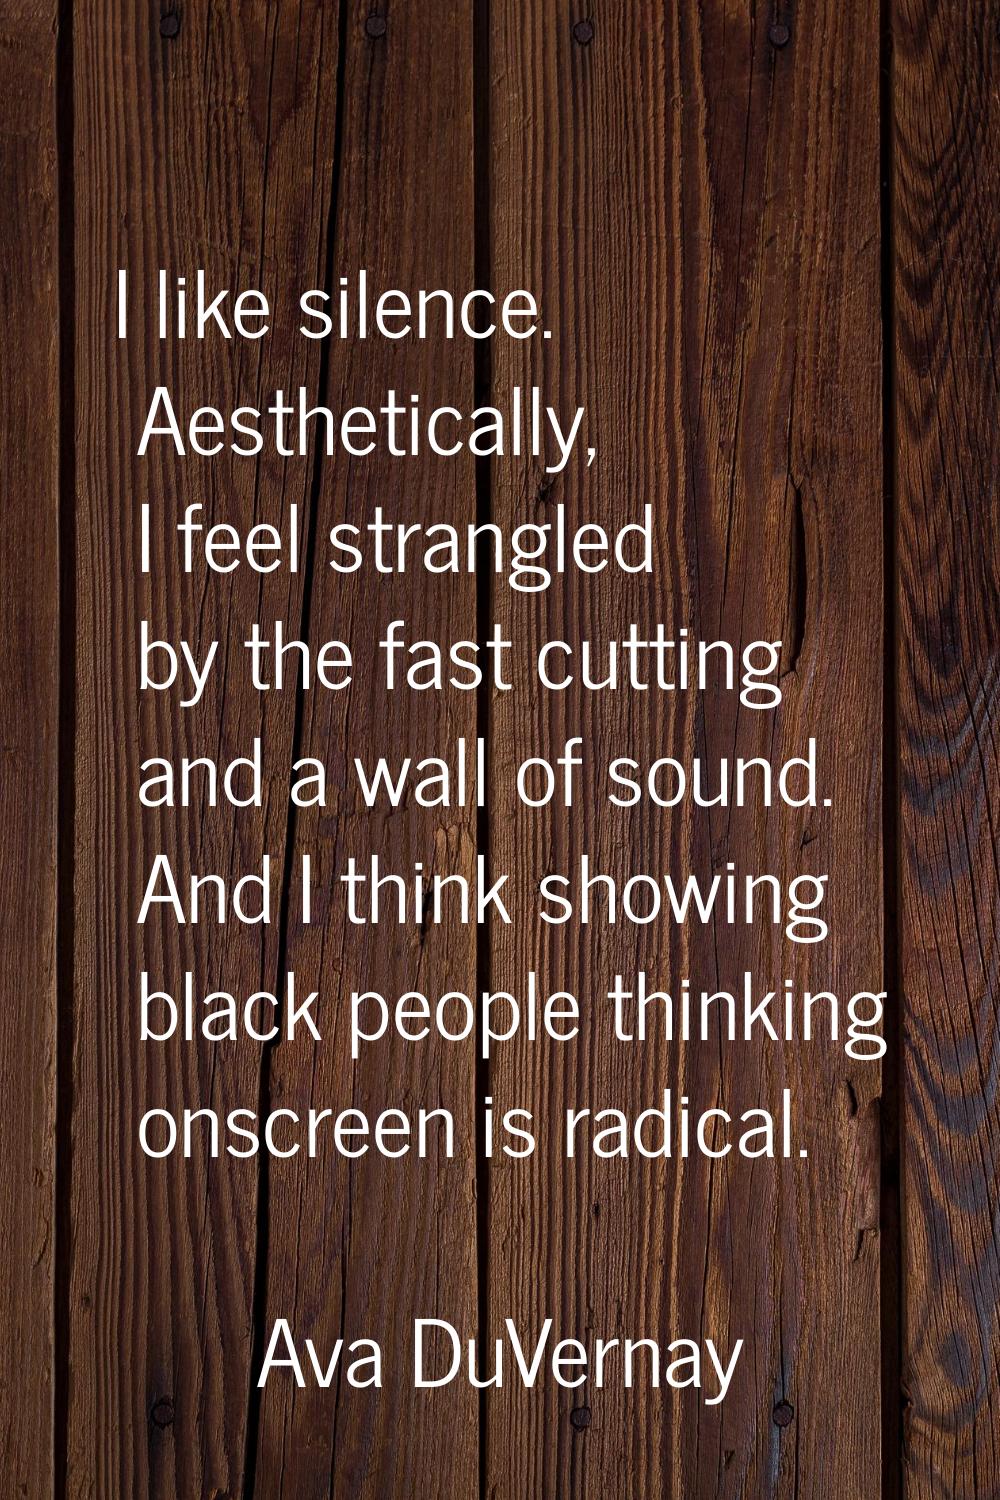 I like silence. Aesthetically, I feel strangled by the fast cutting and a wall of sound. And I thin